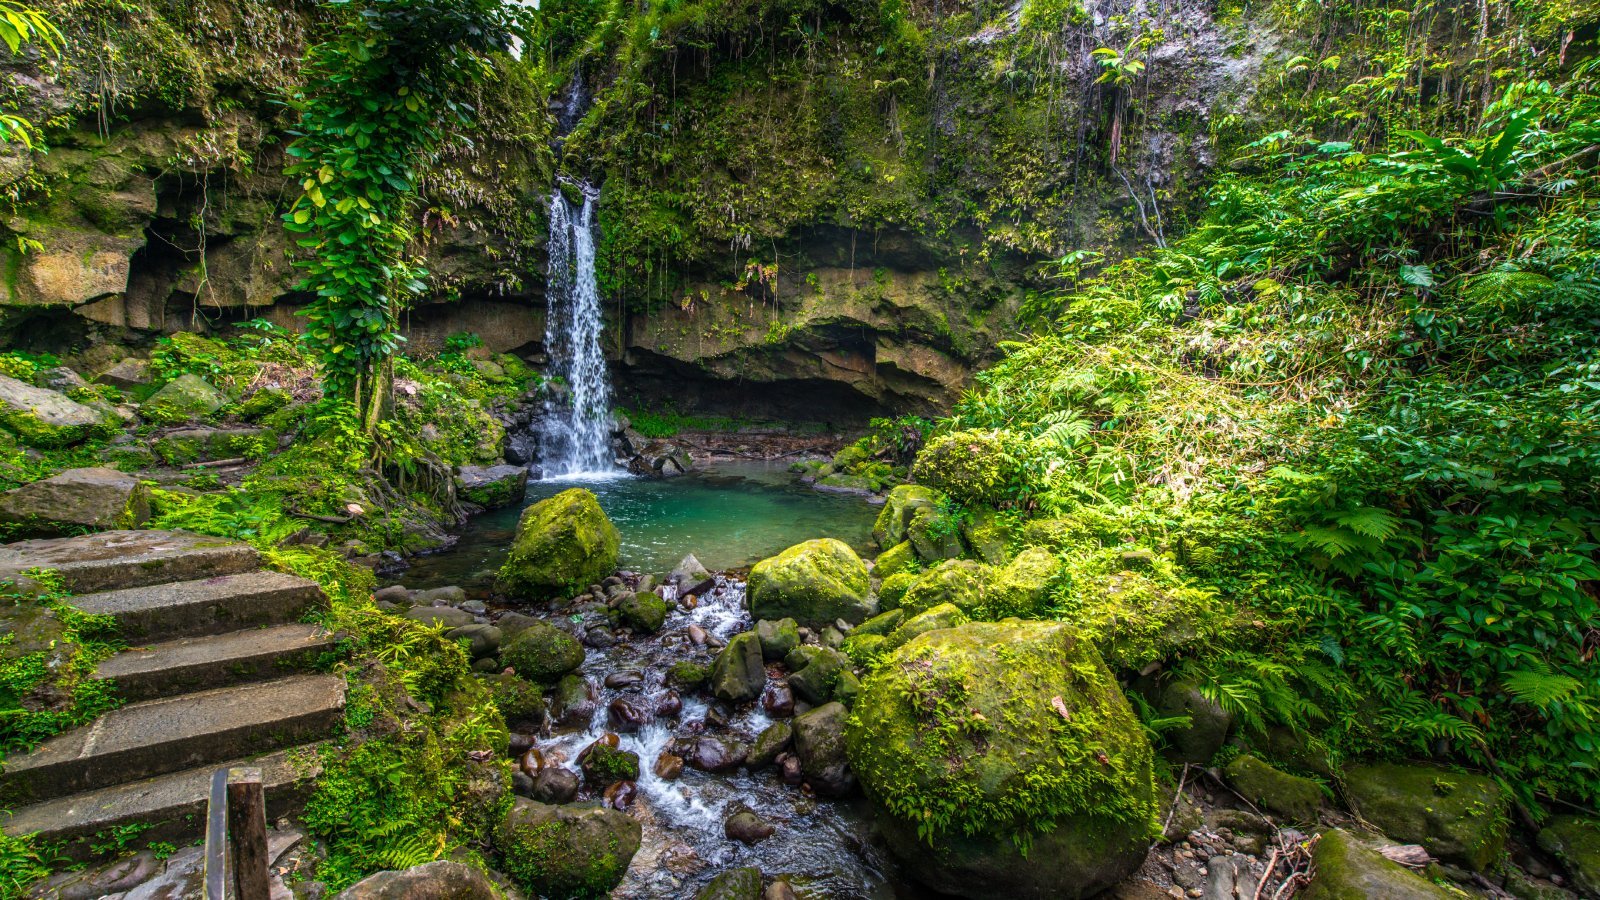 <p class="wp-caption-text">Image Credit: Shutterstock / haspil</p>  <p><span>Known as the “Nature Island,” Dominica stands out for its lush rainforests, abundant waterfalls, and hot springs, all part of a concerted effort to promote eco-tourism and sustainability. The island’s commitment to preserving its natural environment is matched by its development of renewable energy sources and community-based tourism initiatives.</span></p>